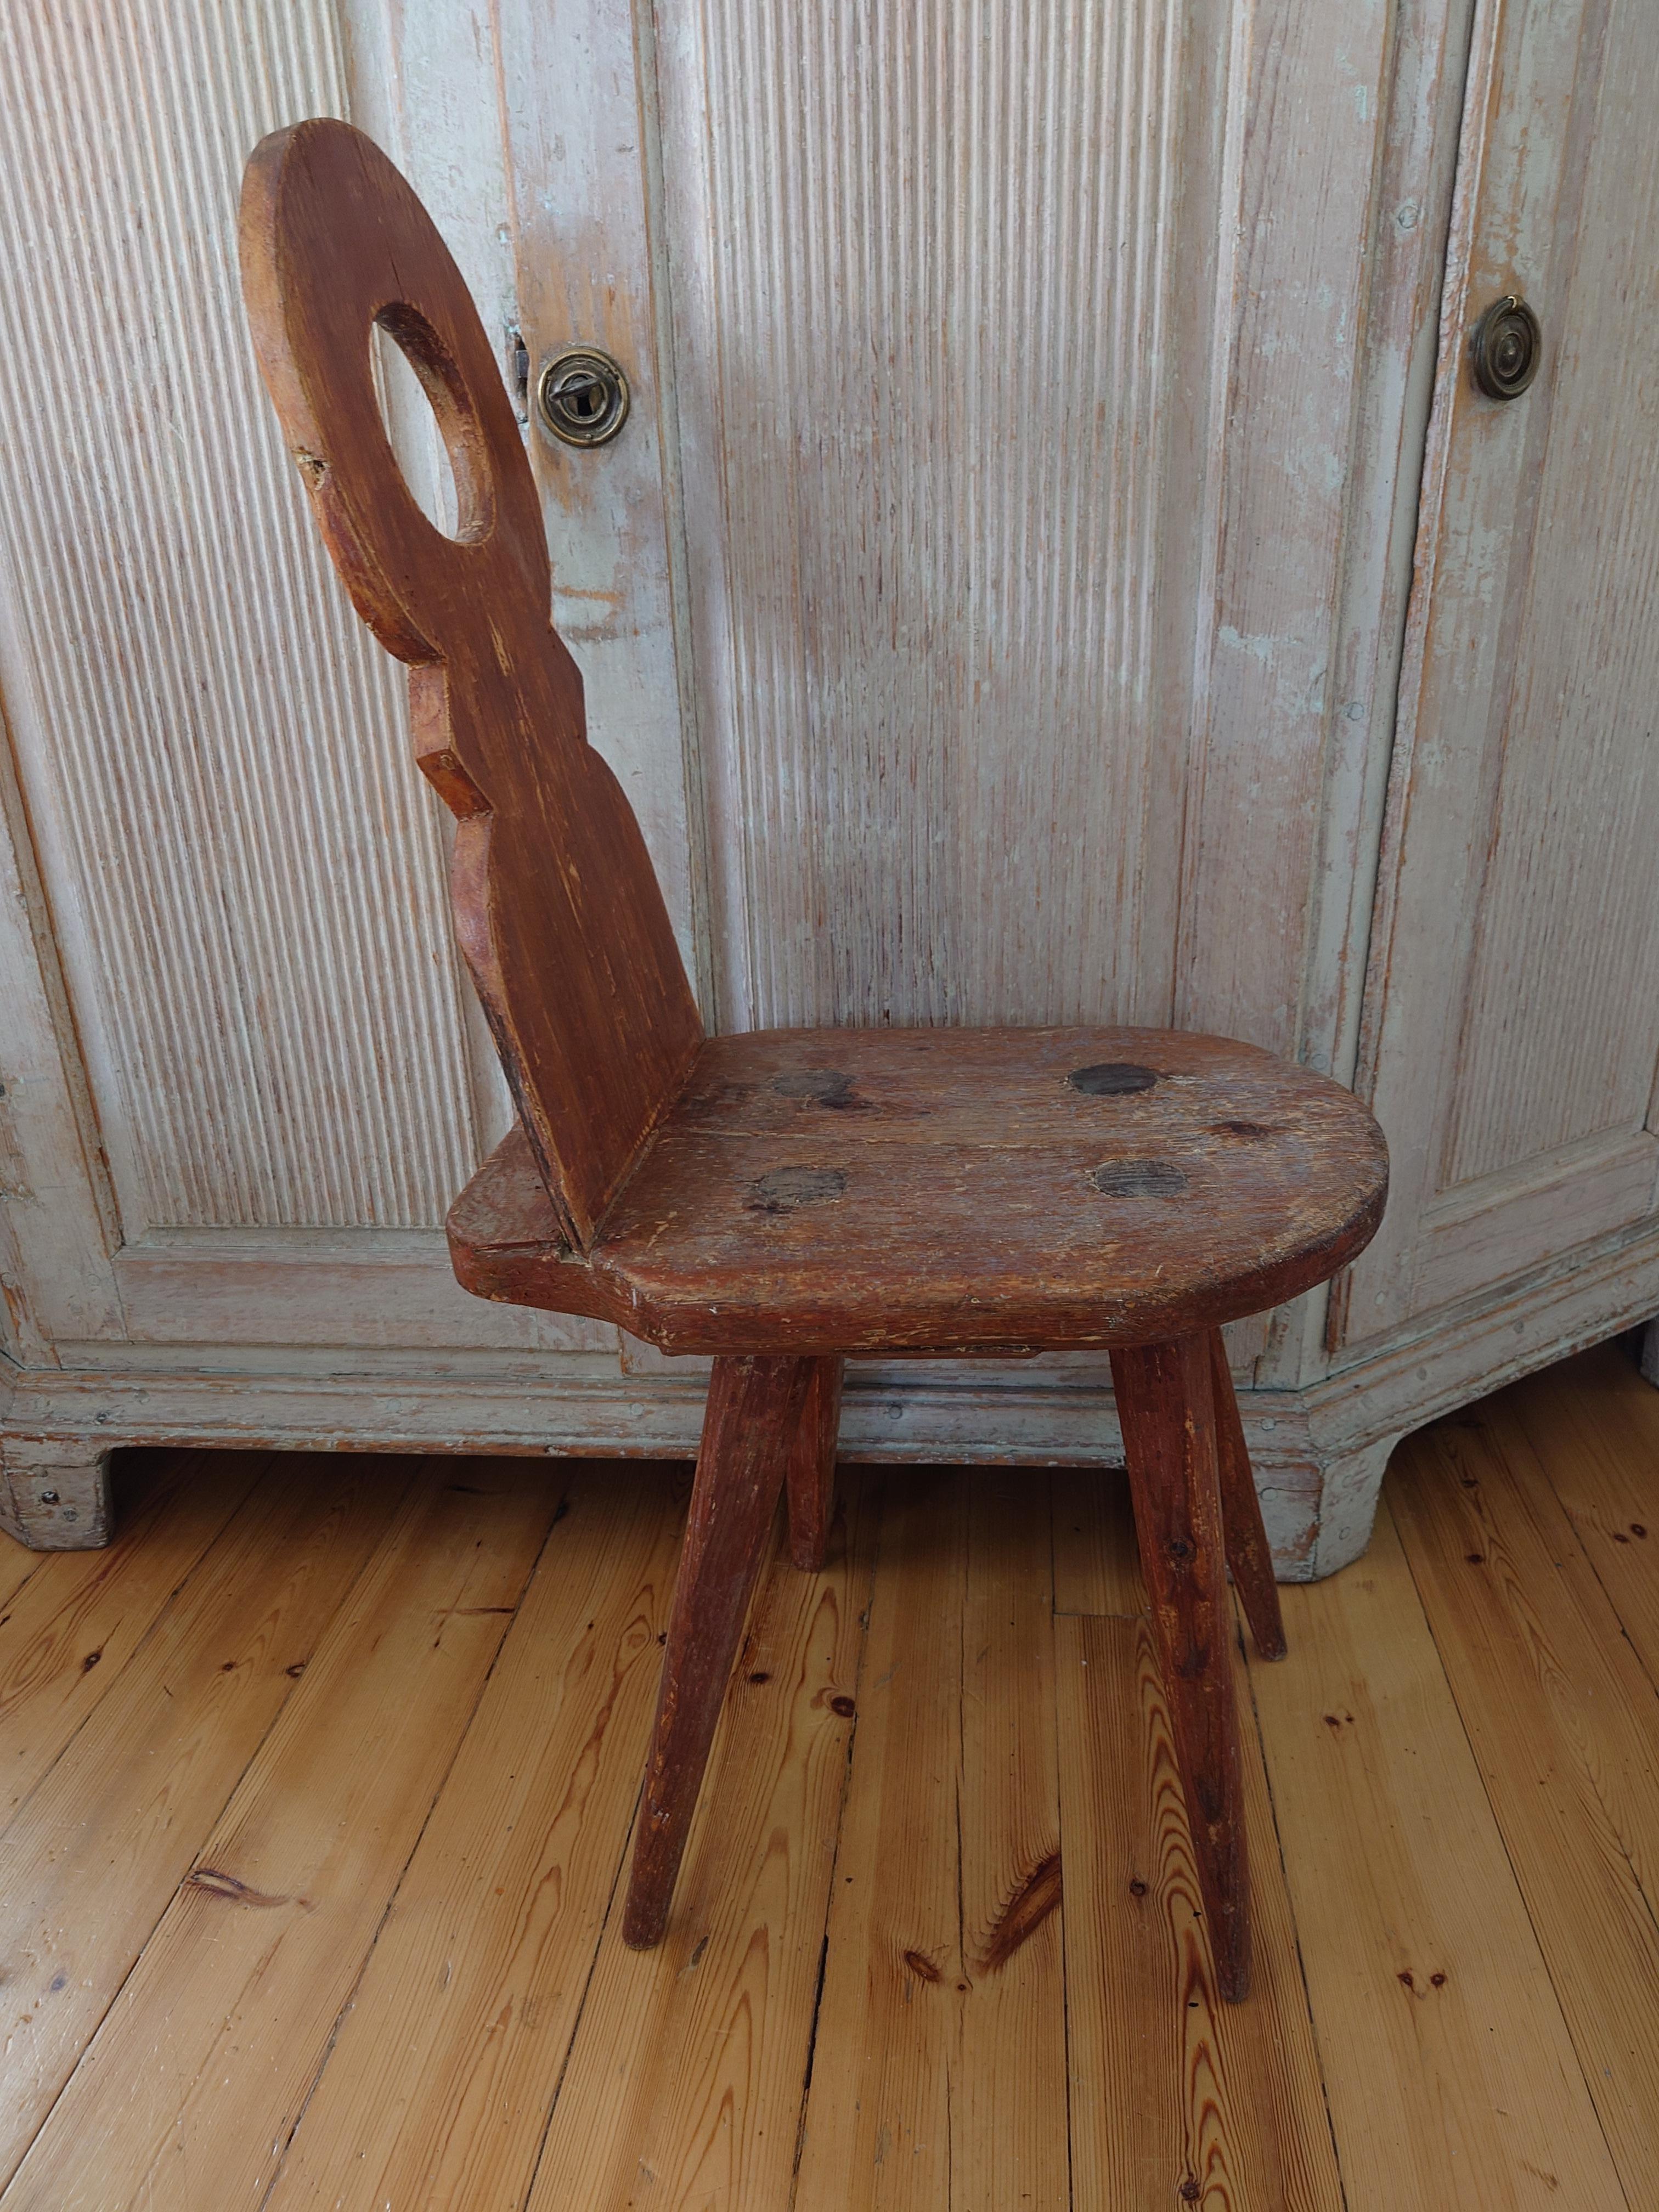 Late 18th Century Swedish Antique Country Rustic Folk Art Chair  For Sale 1